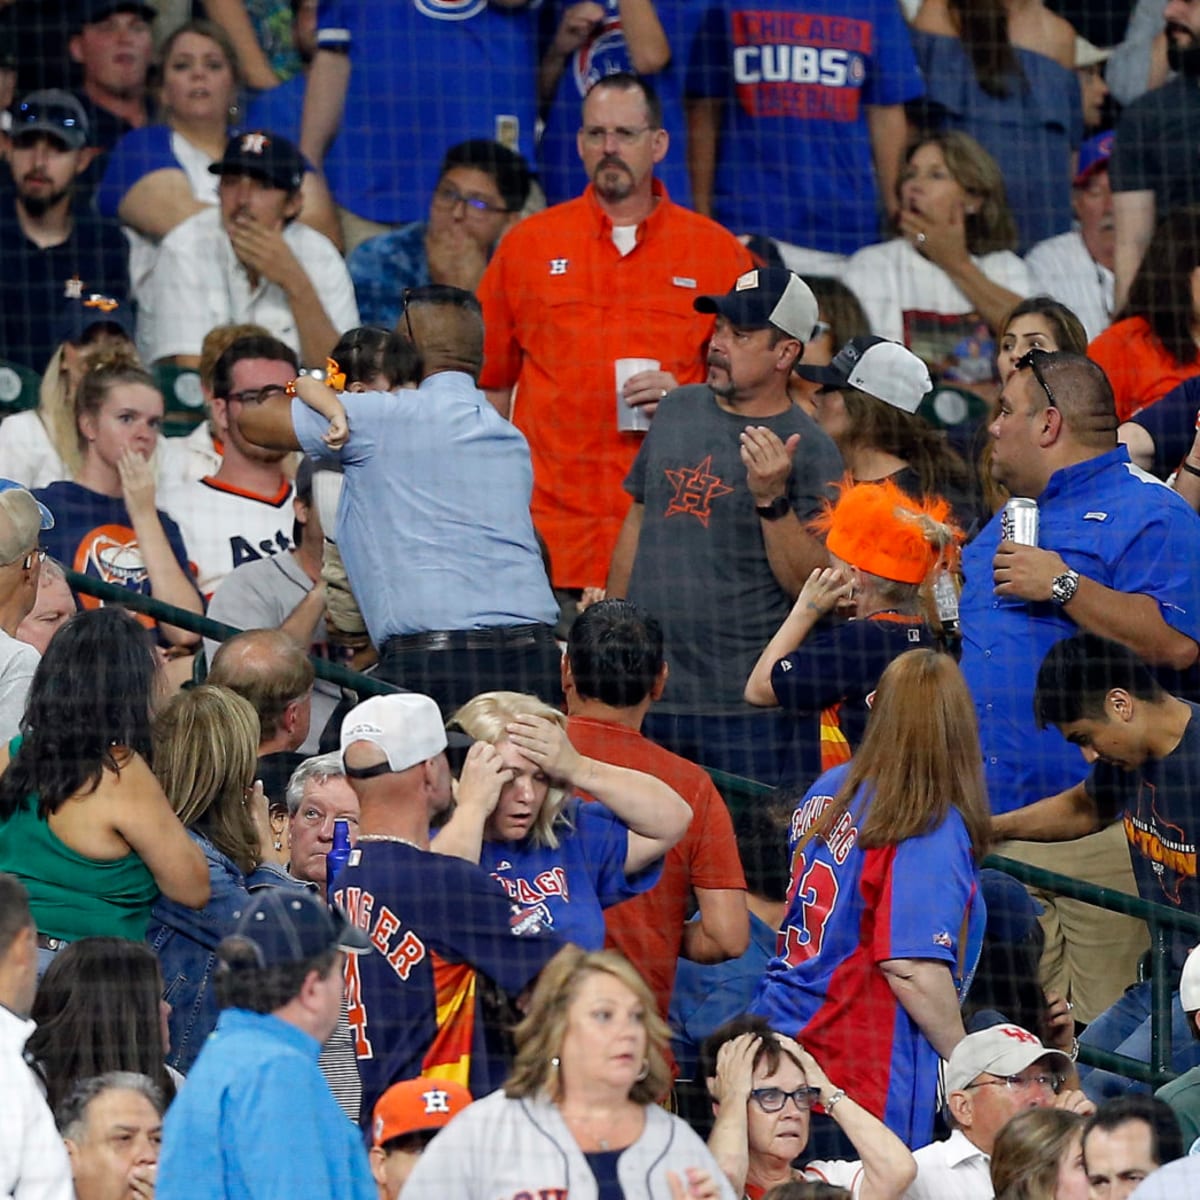 MLB: Almora foul off young fan in Houston shows need for more netting